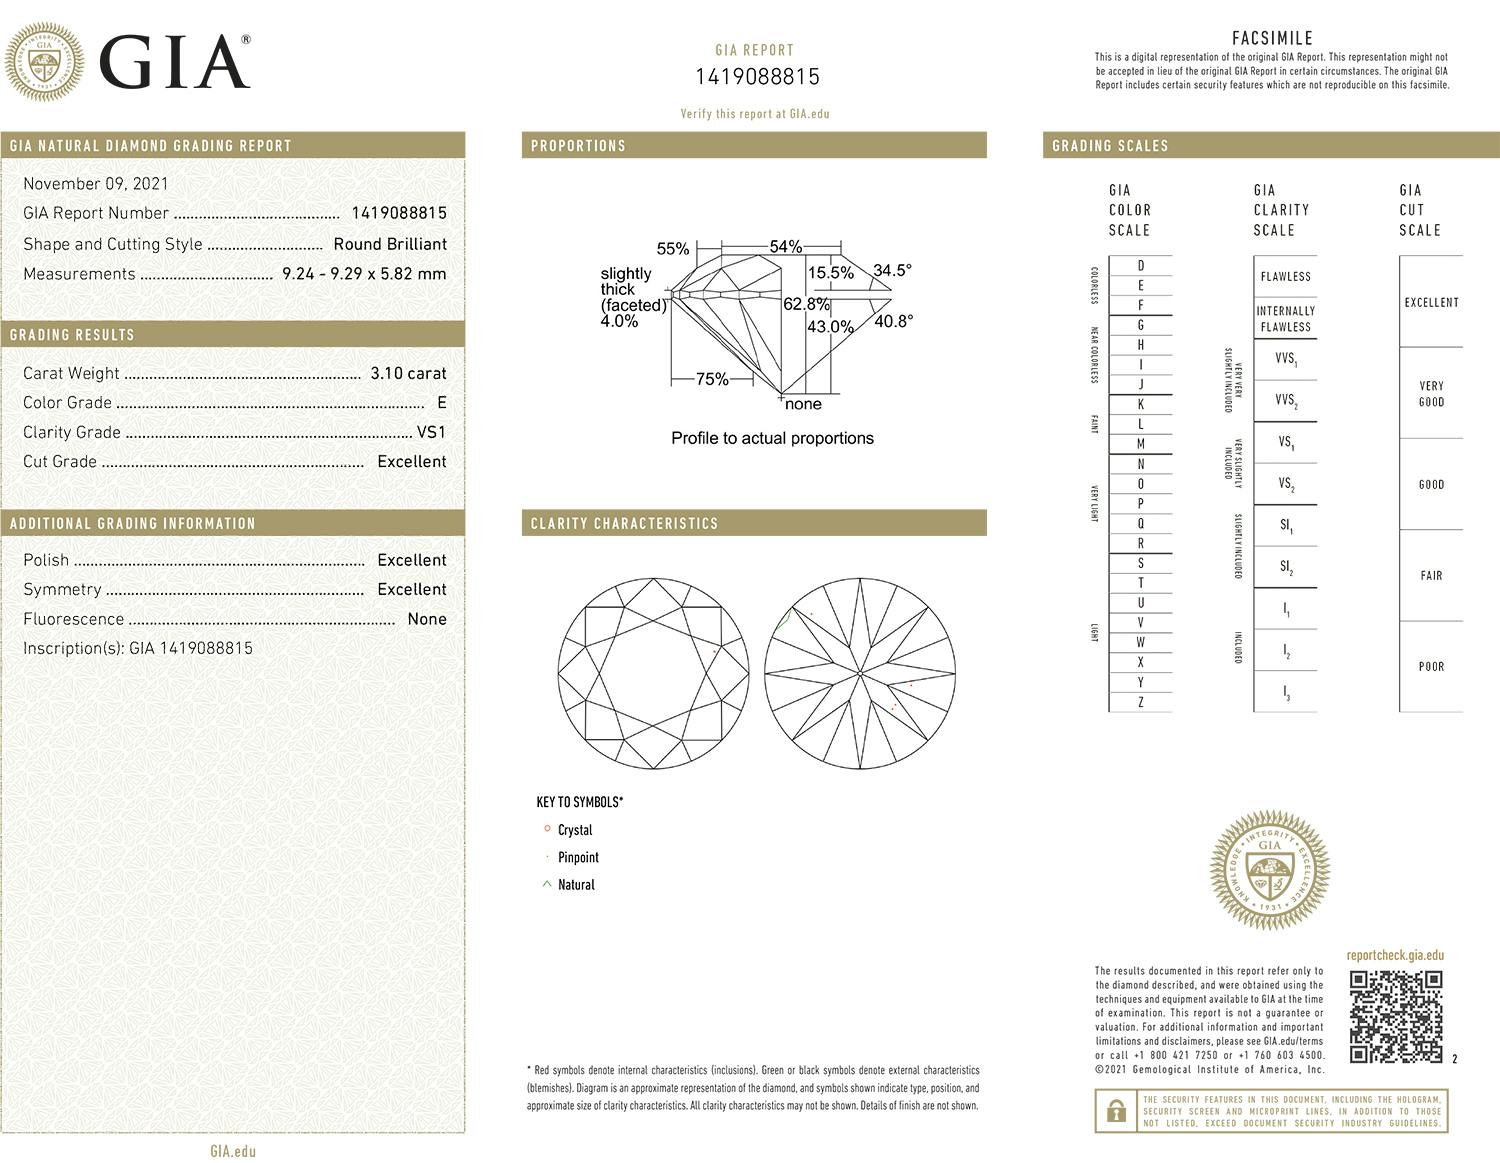 Example of a GIA grading report for a roundd diamond